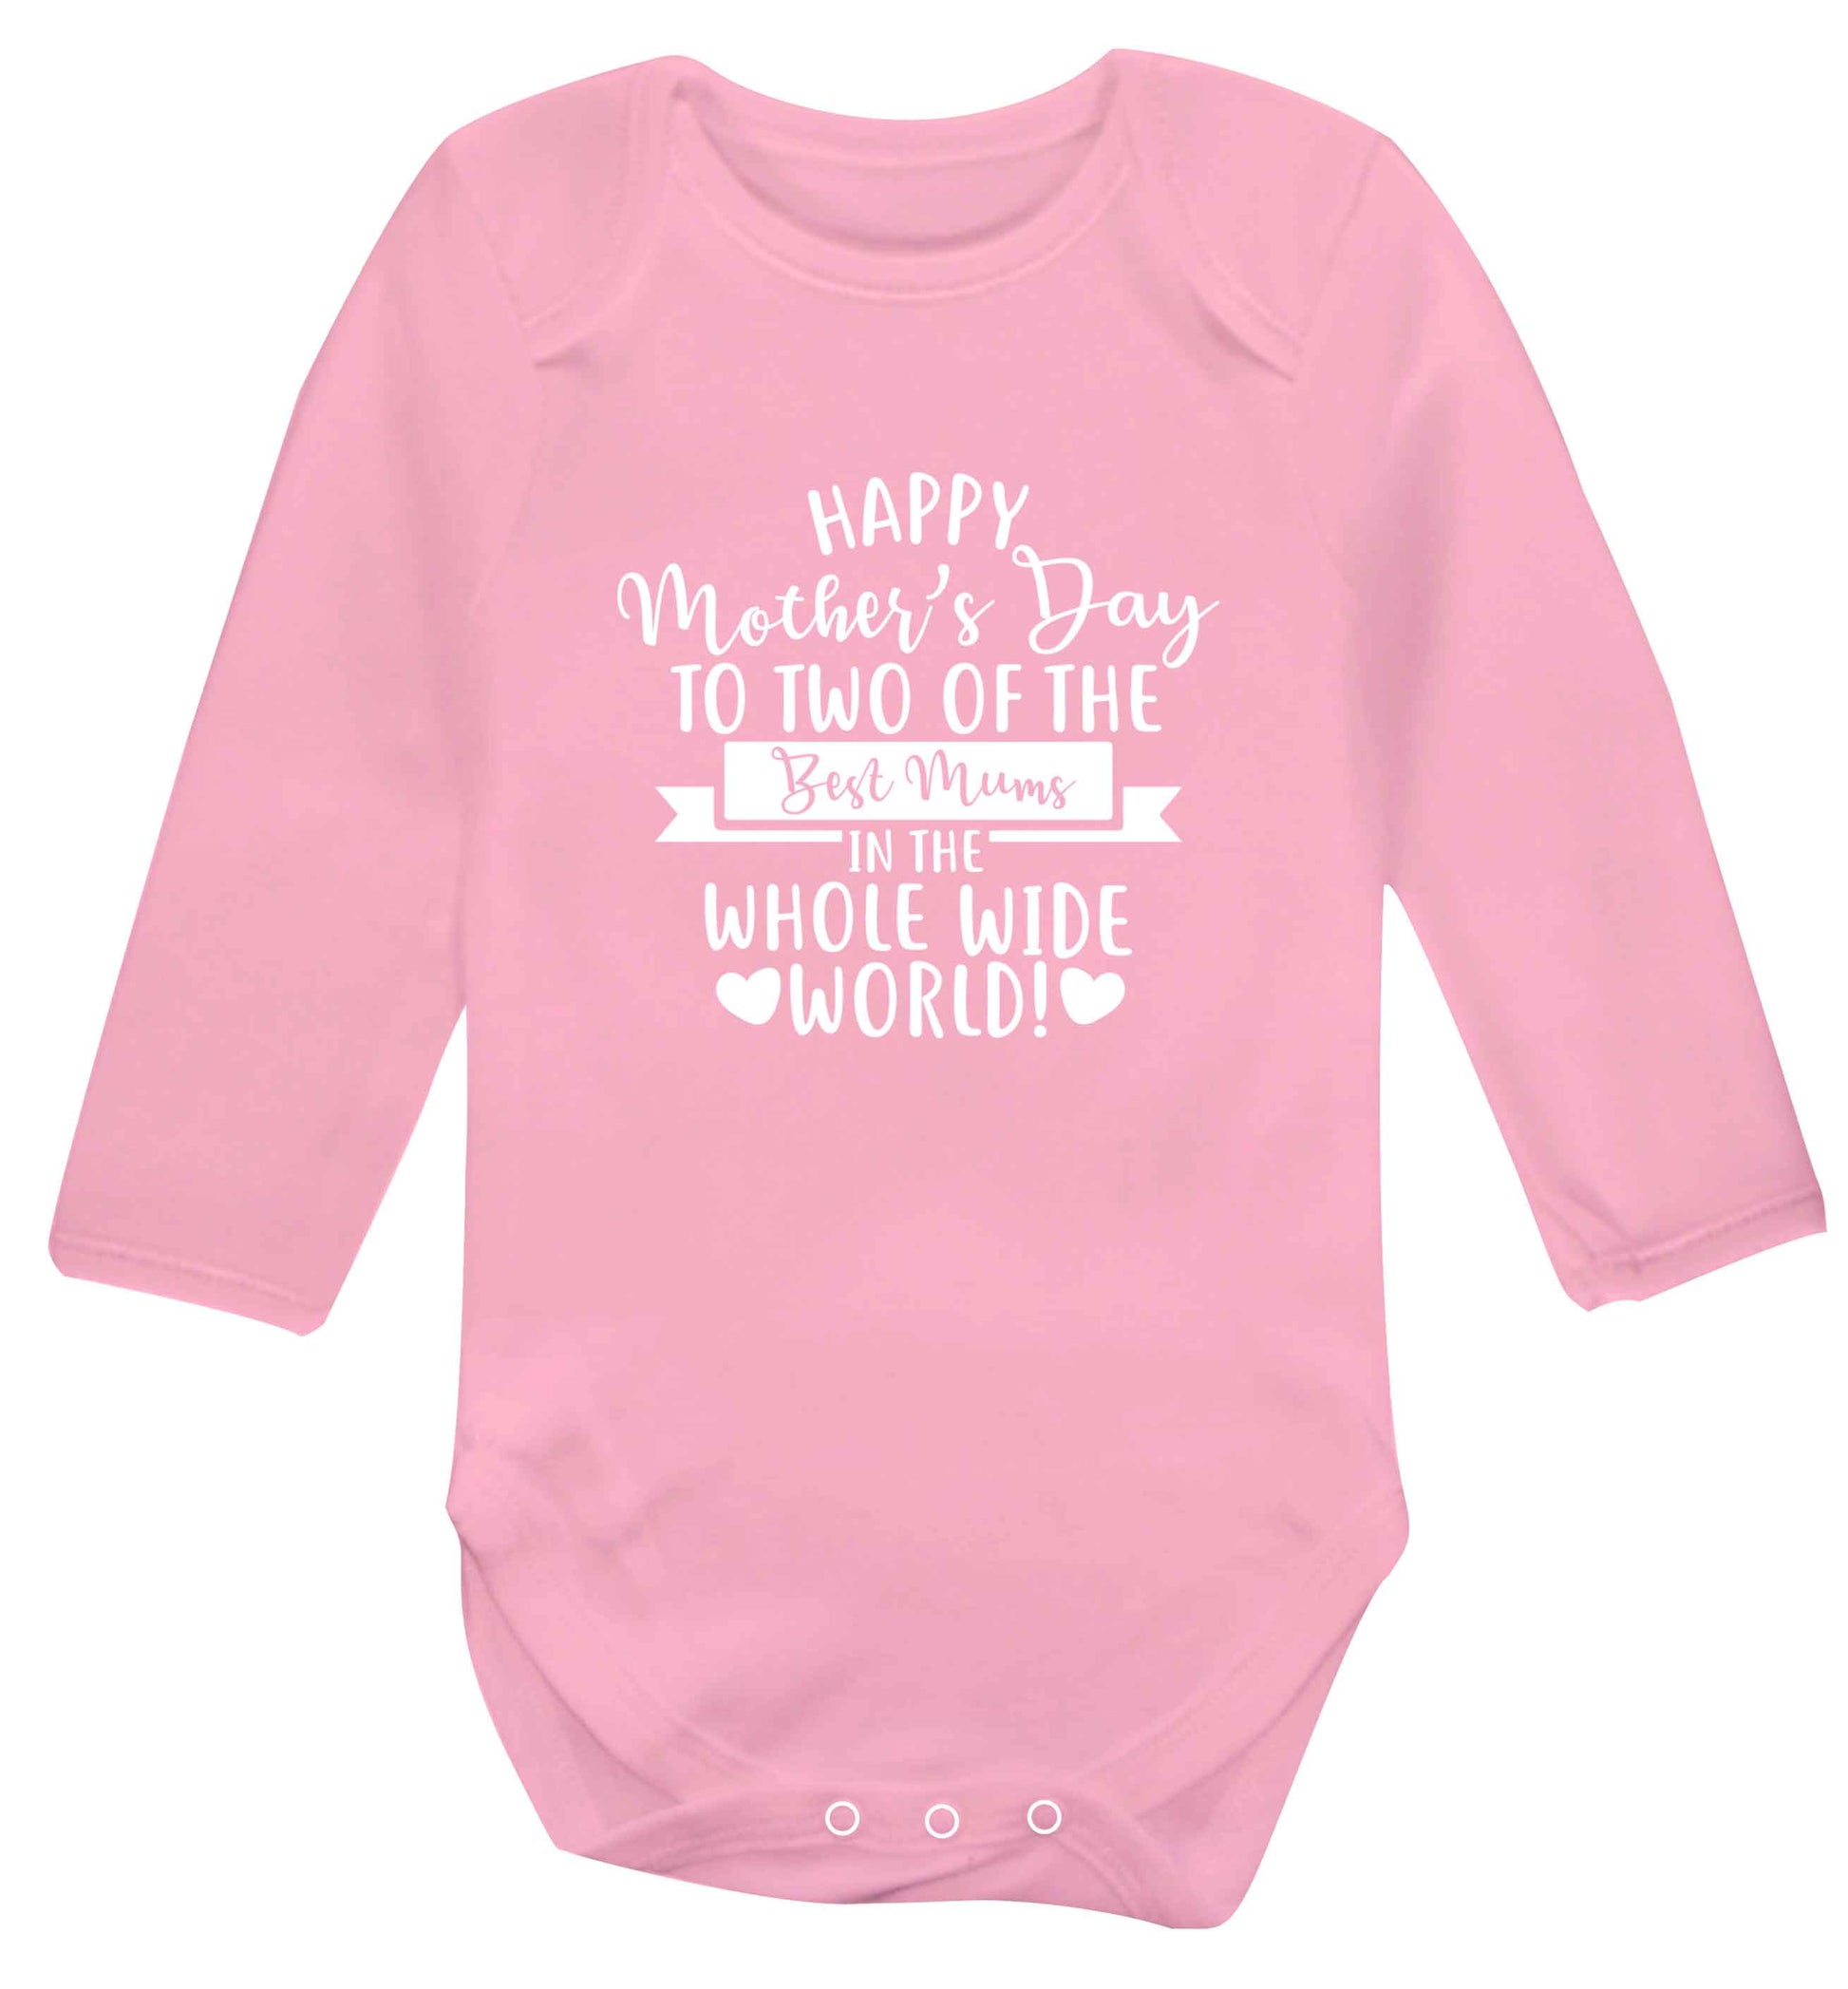 Happy mother's day to two of the best mums in the whole wide world baby vest long sleeved pale pink 6-12 months